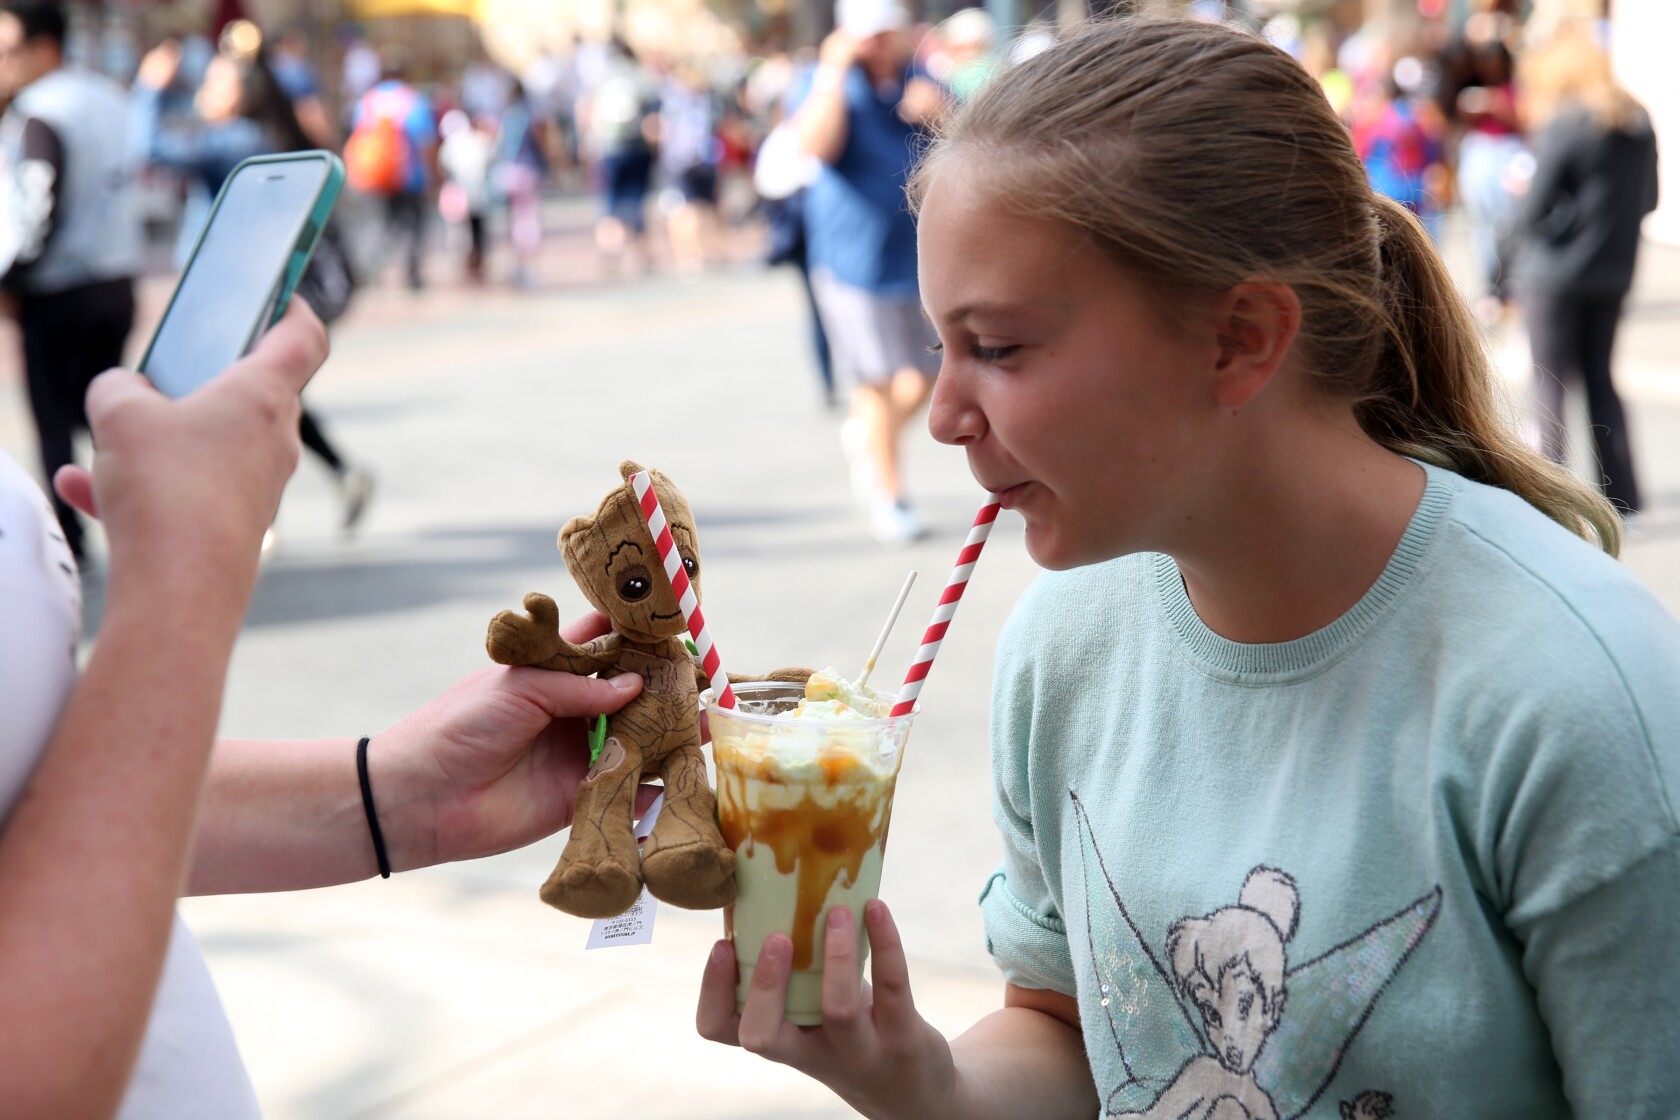 Theme parks whip up extreme Halloween foods and drinks to get social media buzz